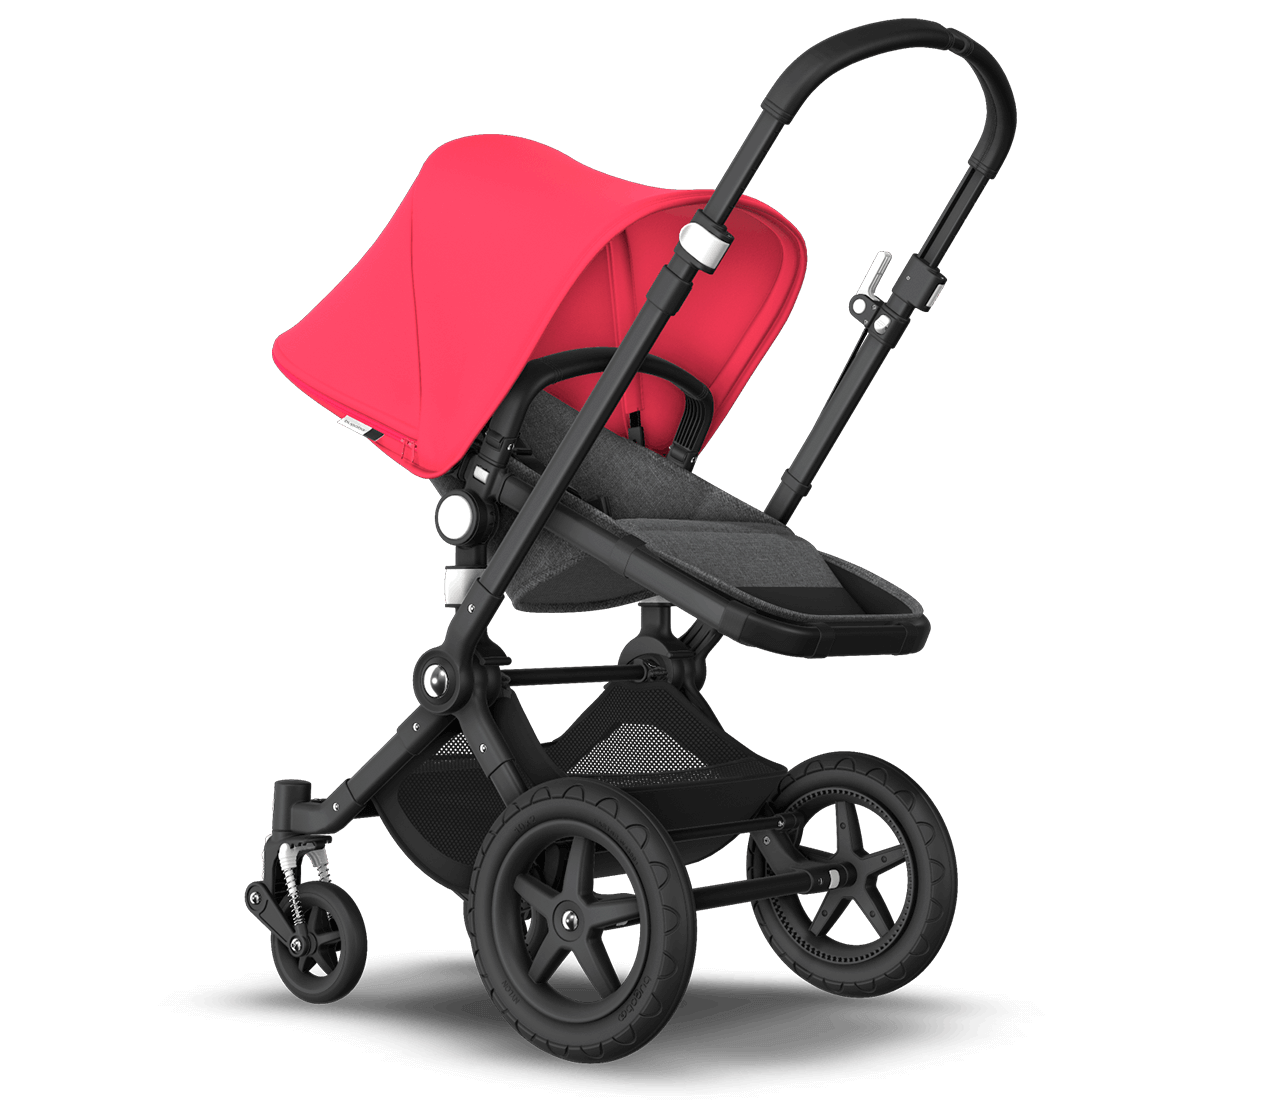 Bugaboo Cameleon 3 specifications